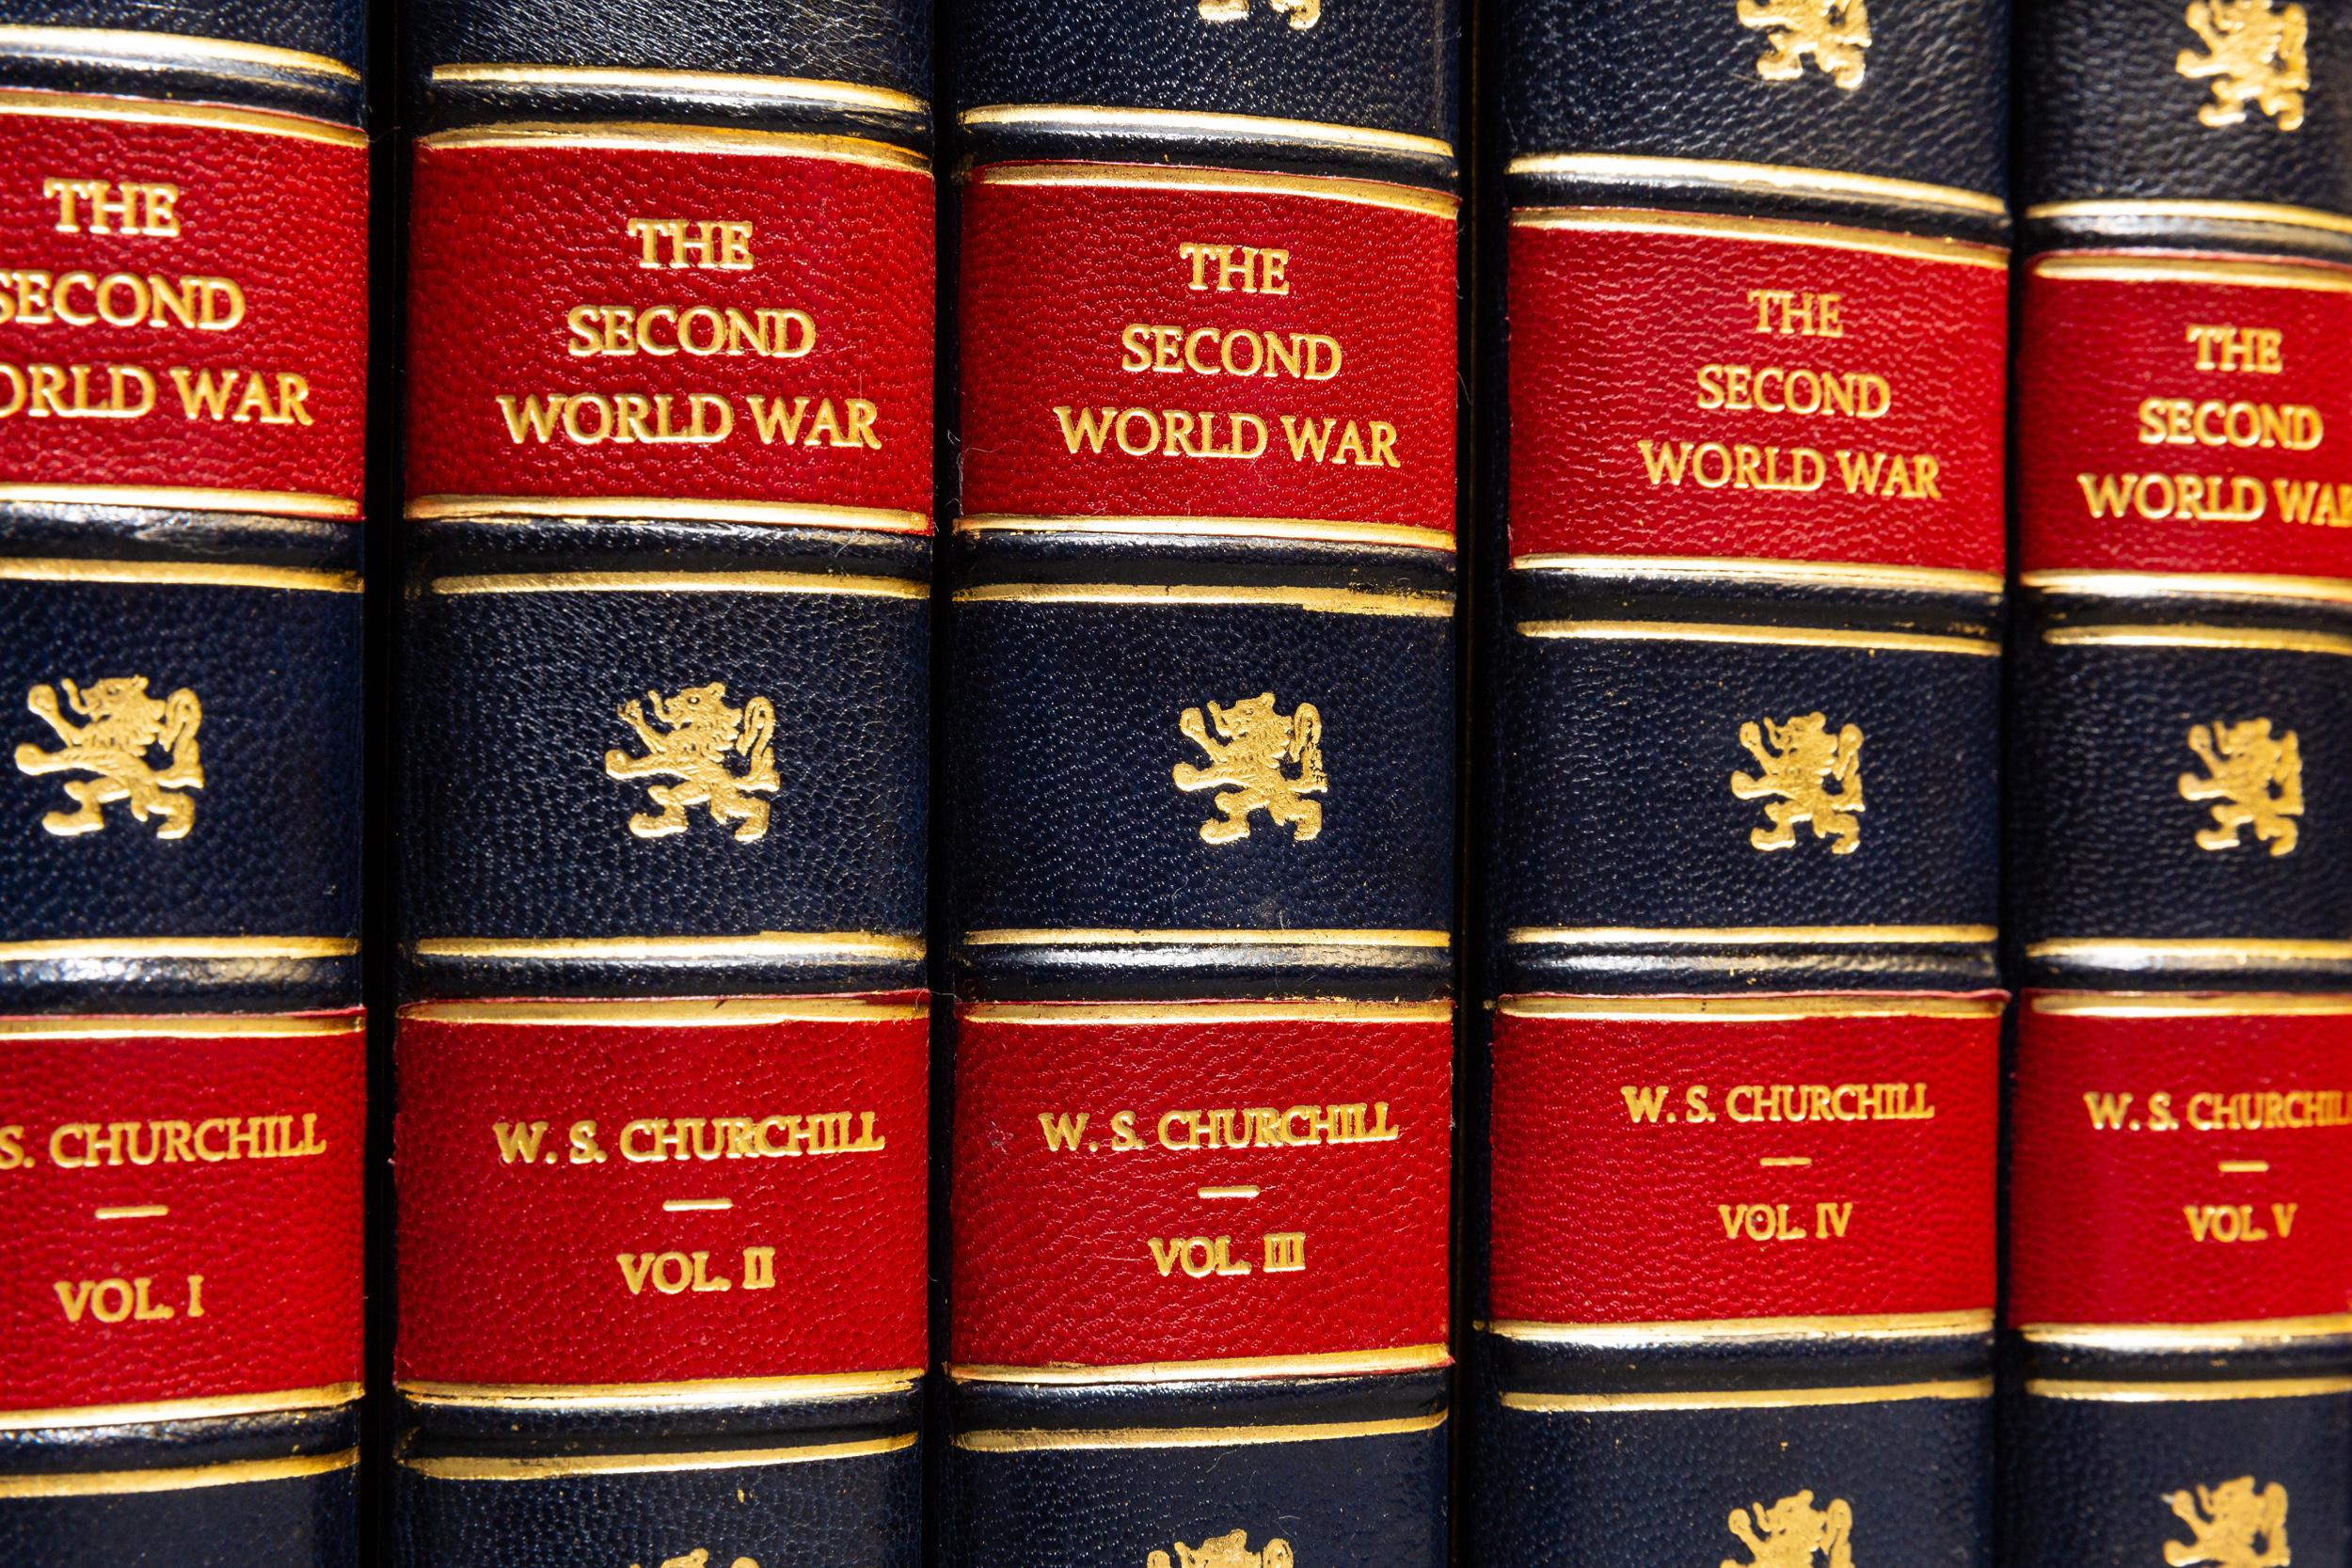 6 Volumes. Winston Churchill, The Second World War. Bound in full blue morocco. Gilt ruling on covers. Raised bands. All edges gilt. Red morocco labels on spine. First Edition. Published: London; Cassell & Co. Ltd. 1948.